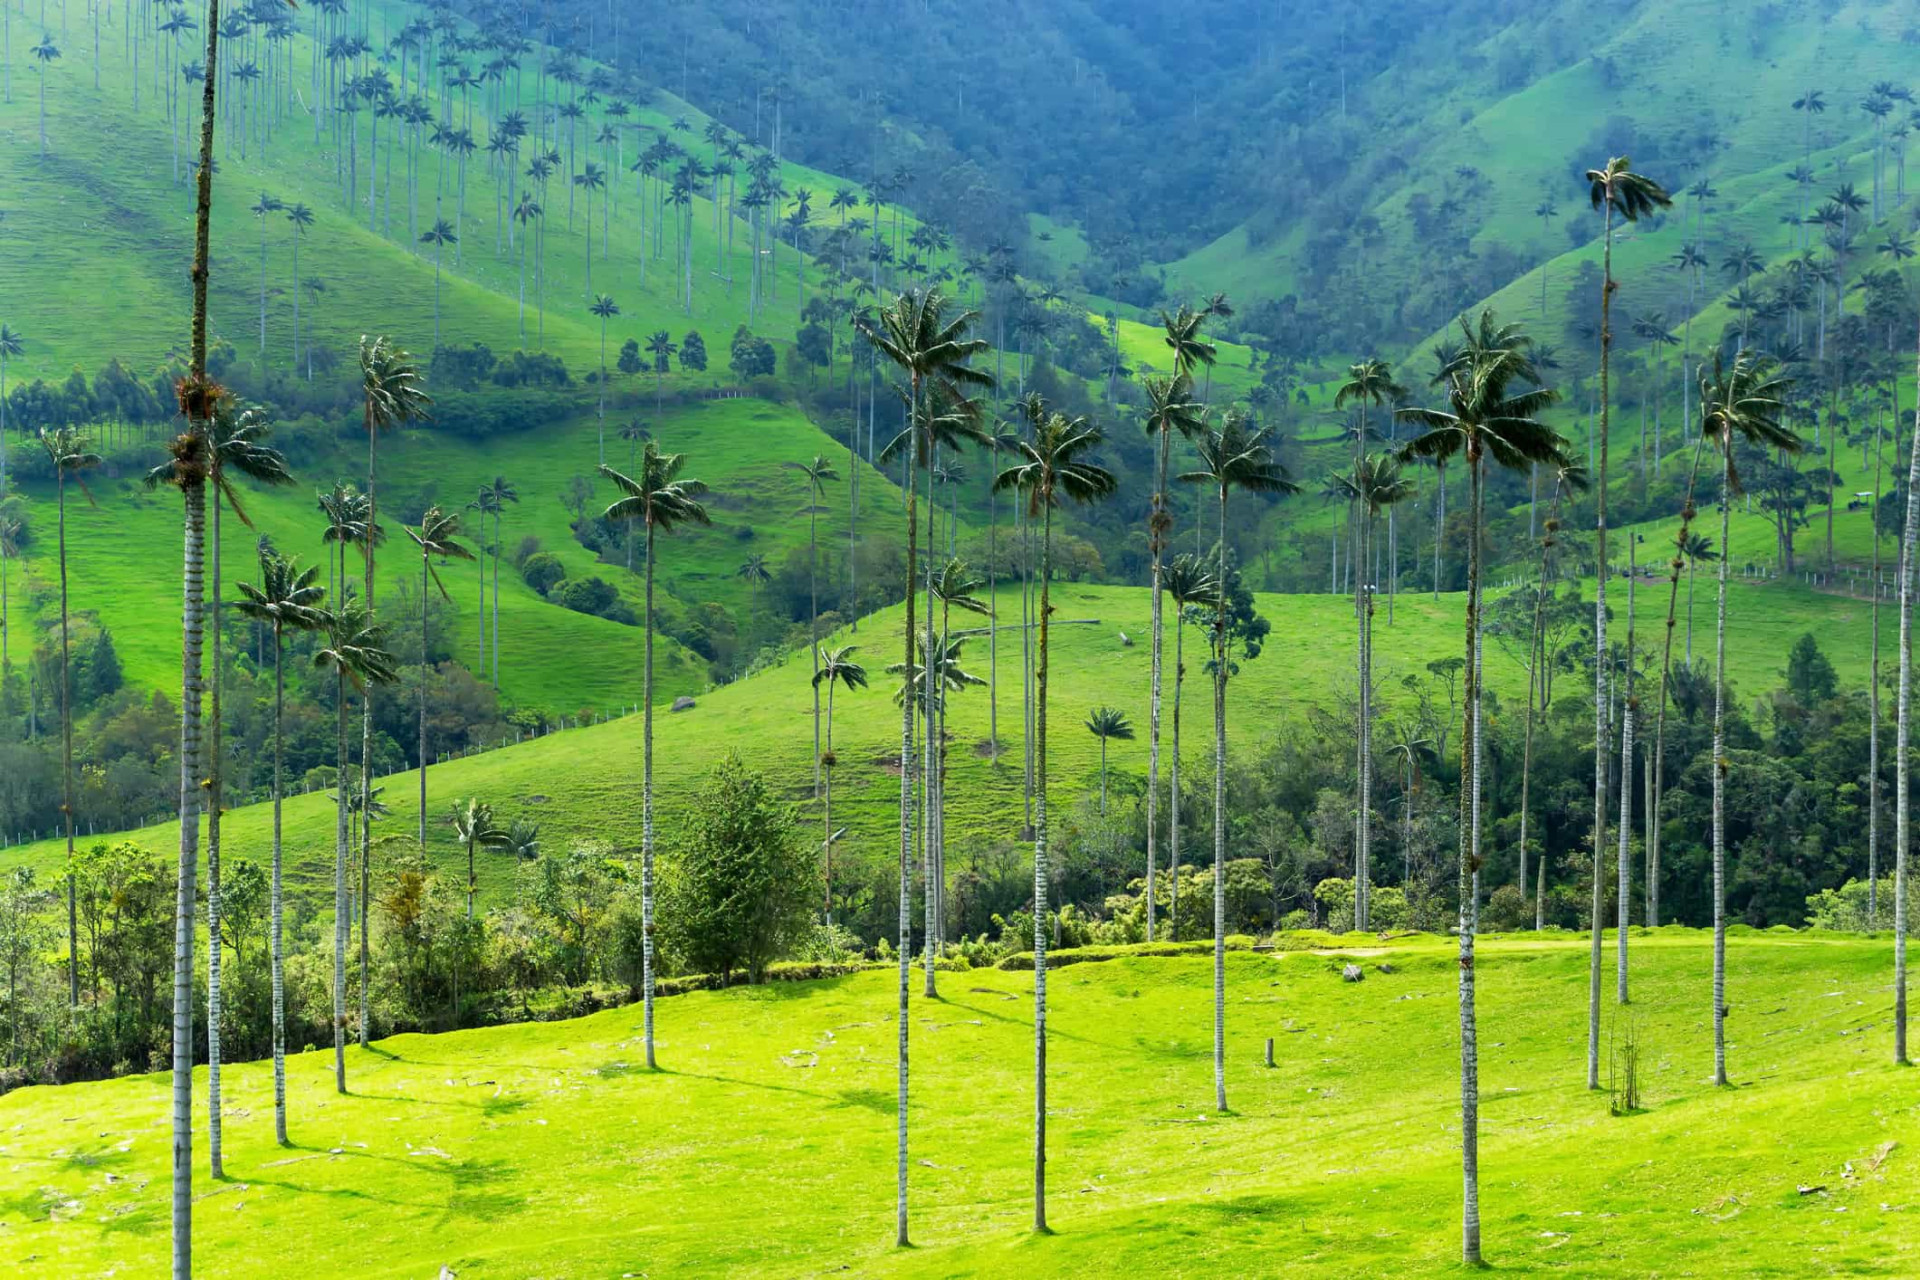 Resembling toothpicks piercing an emerald carpet, the wax palms decorating the floor of the Cocora Valley in the Los Nevados National Natural Park stand as the national tree and symbol of Colombia.